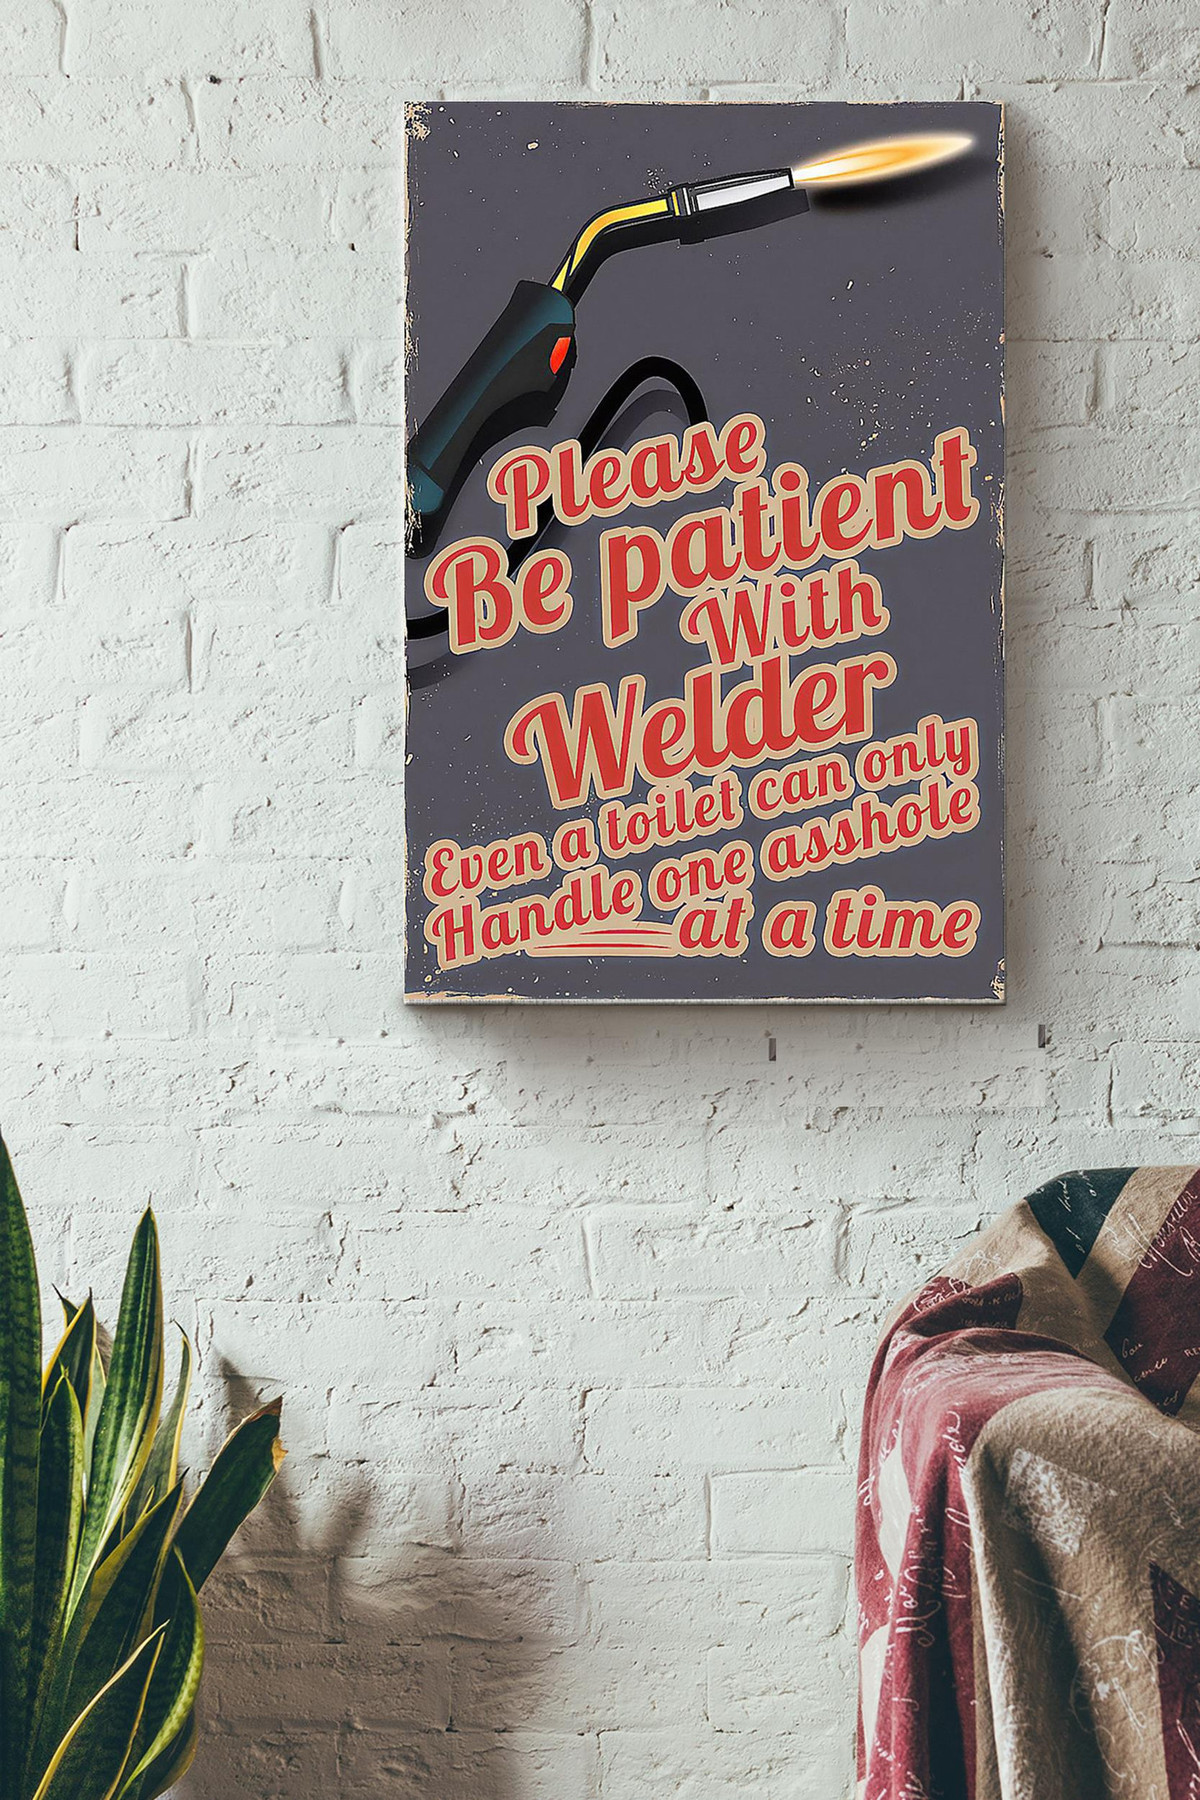 Please Be Patient With Welder Canvas Gallery Painting Wrapped Canvas  Wrapped Canvas 8x10